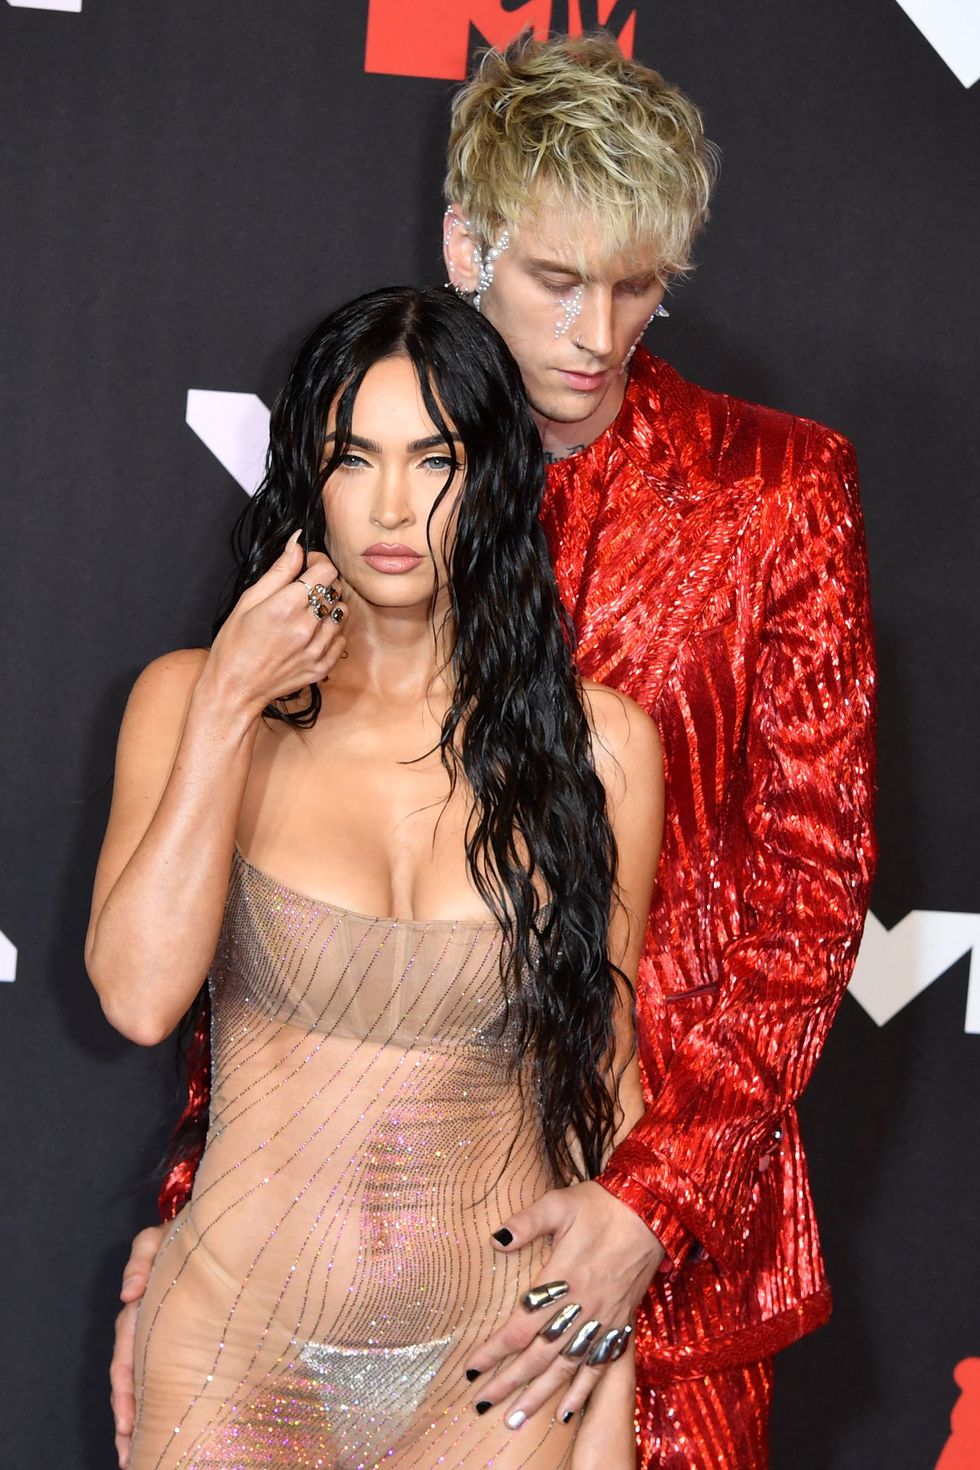 us actress megan fox l and us singer machine gun kelly arrive for the 2021 mtv video music awards at barclays center in brooklyn, new york, september 12, 2021 photo by angela  weiss  afp photo by angela  weissafp via getty images